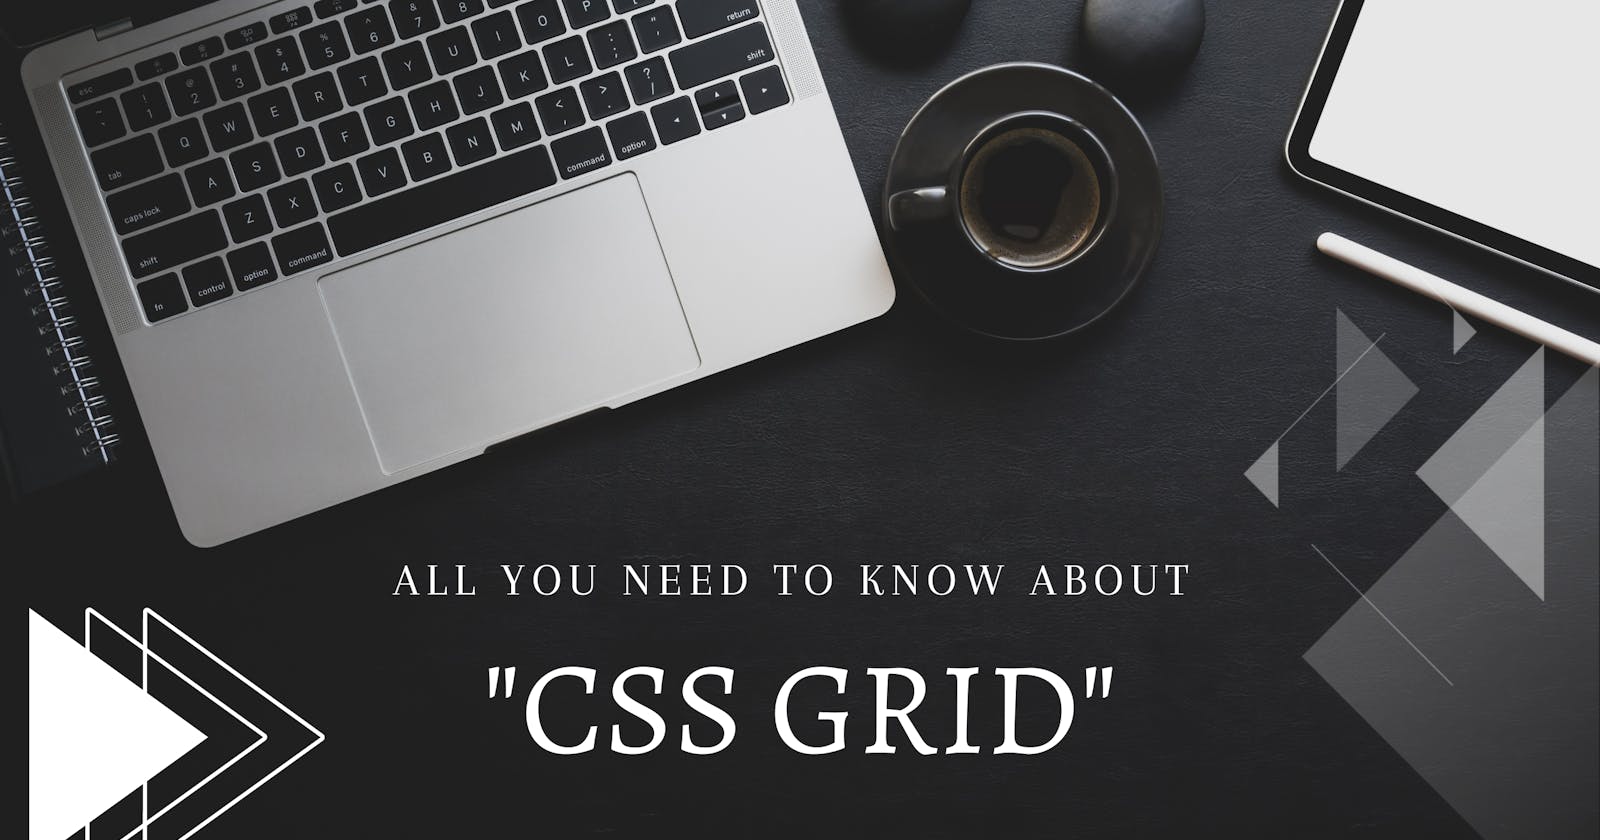 All you need to know about "Css Grid"